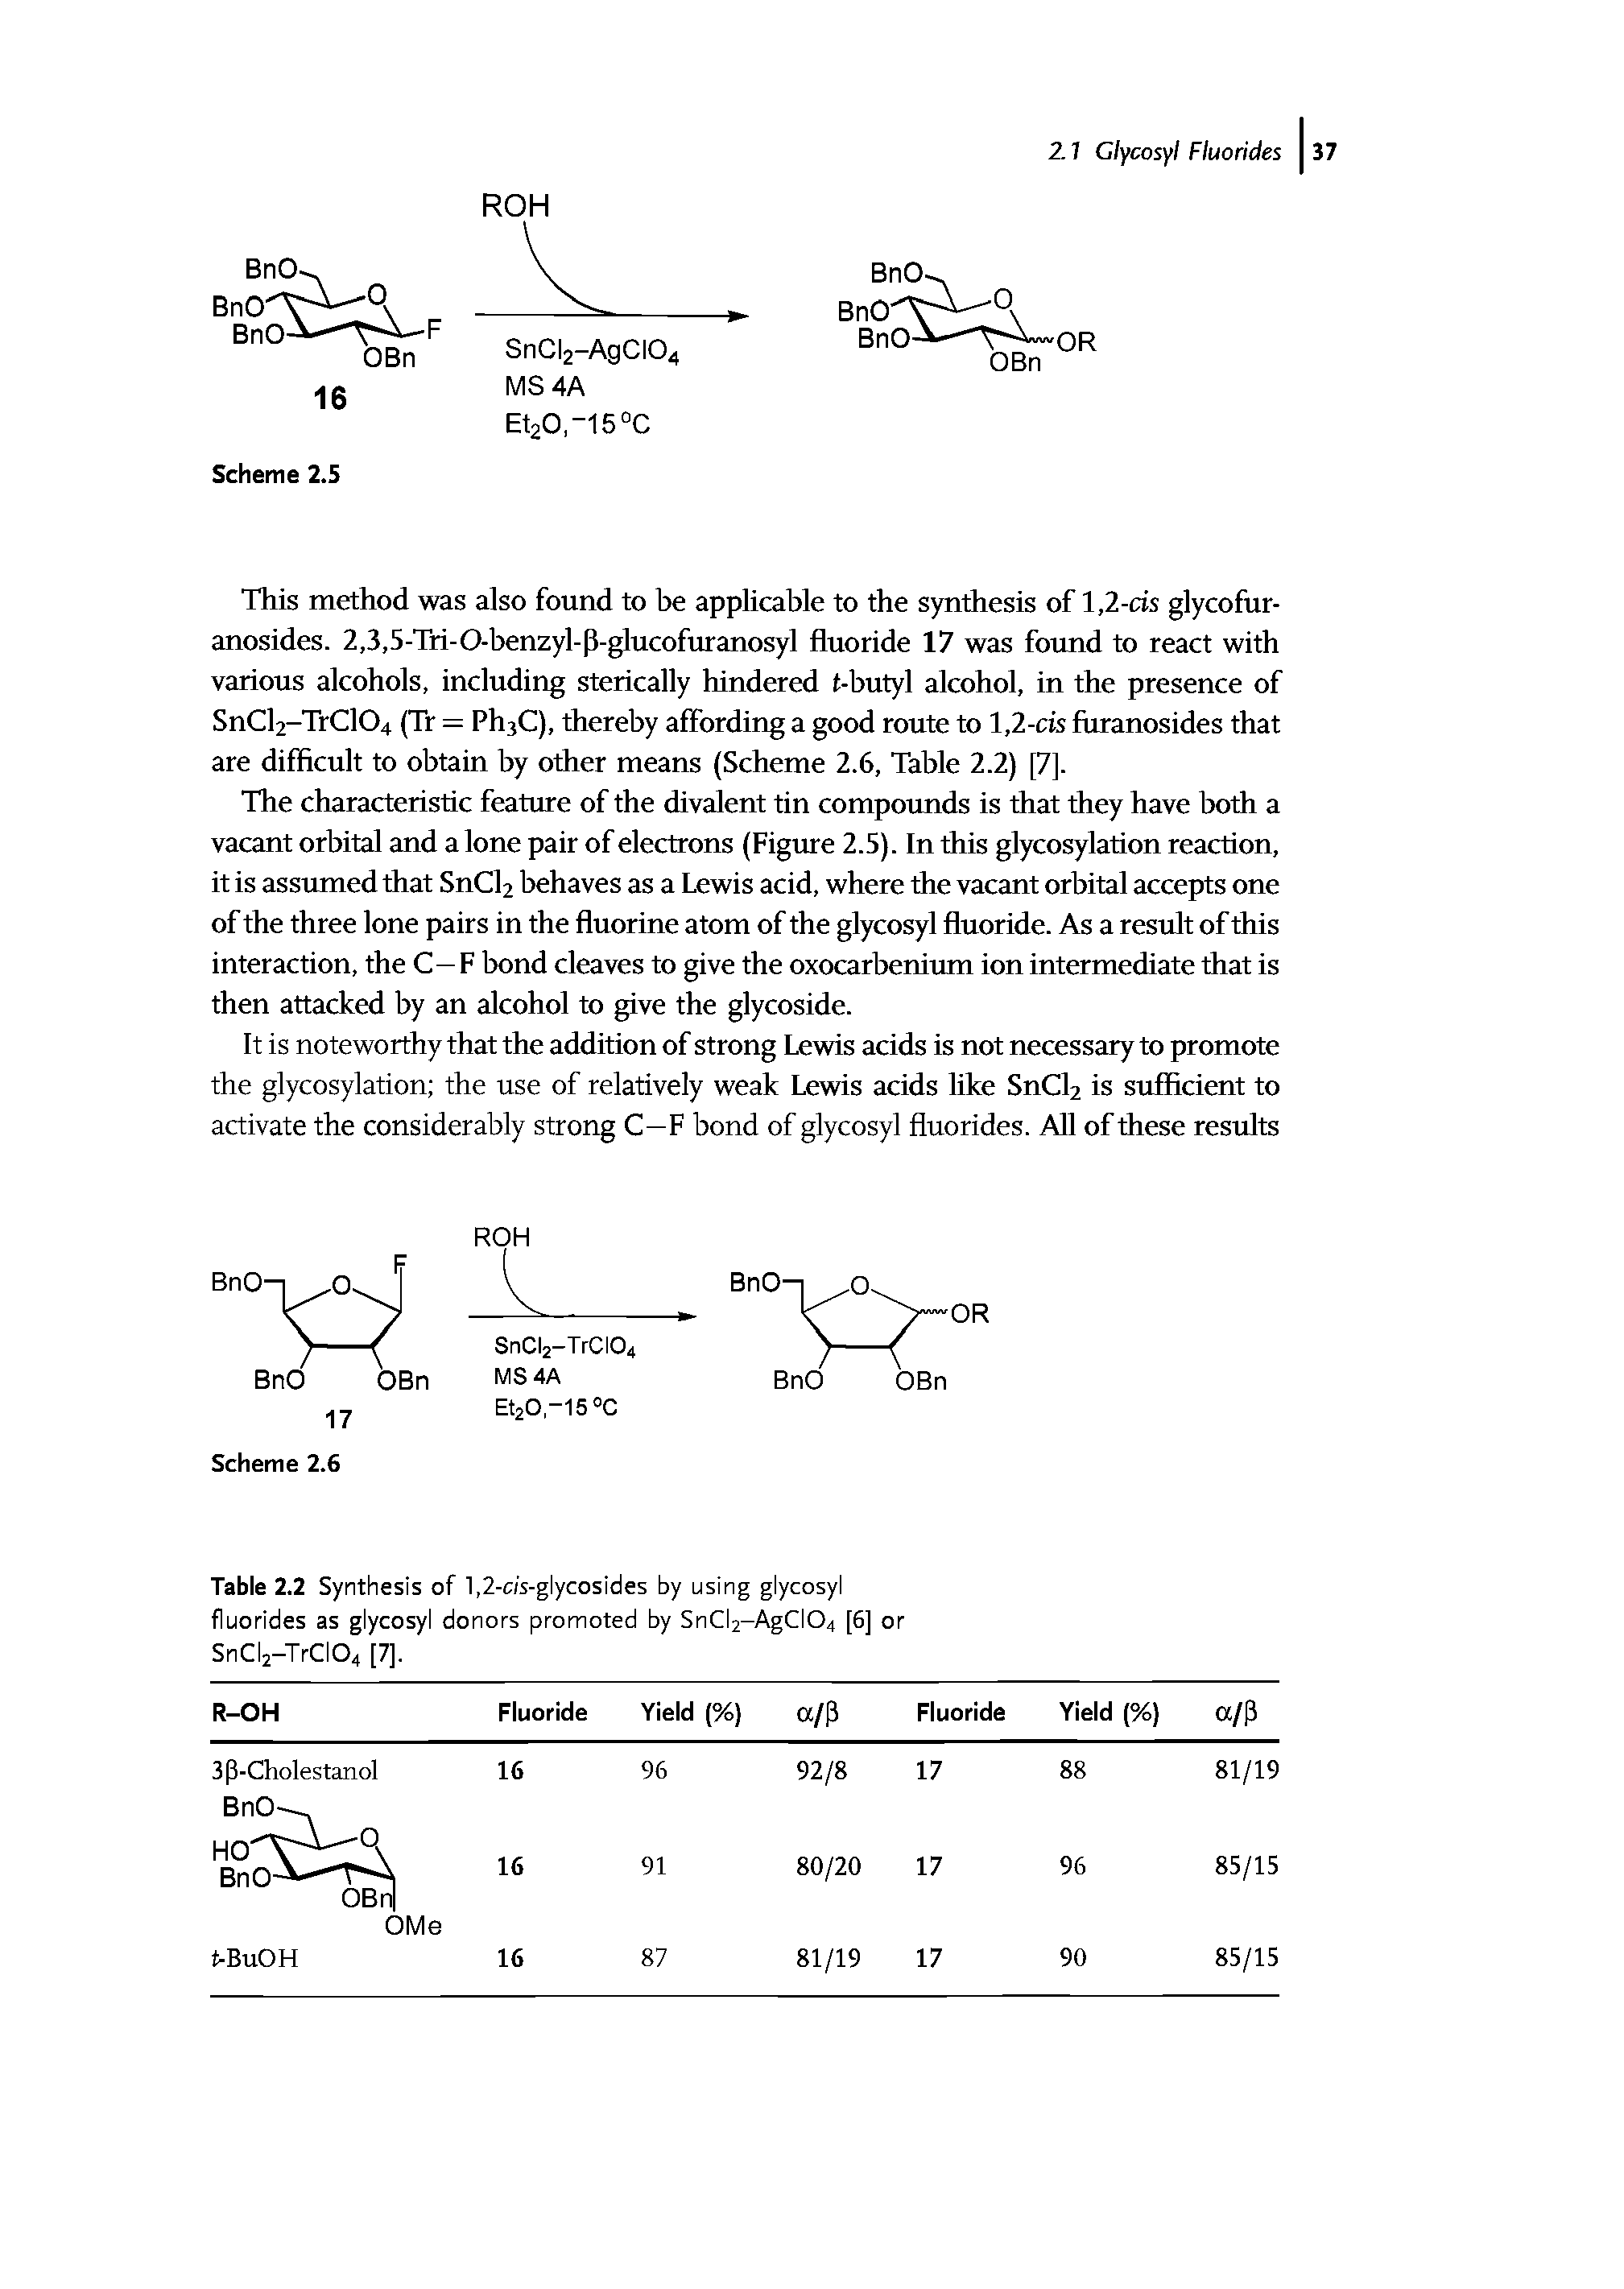 Table 2.2 Synthesis of 1,2-c/s-glycosides by using glycosyl fluorides as glycosyl donors promoted by SnCI2-AgCI04 [6] or SnCI2-TrCI04 [7],...